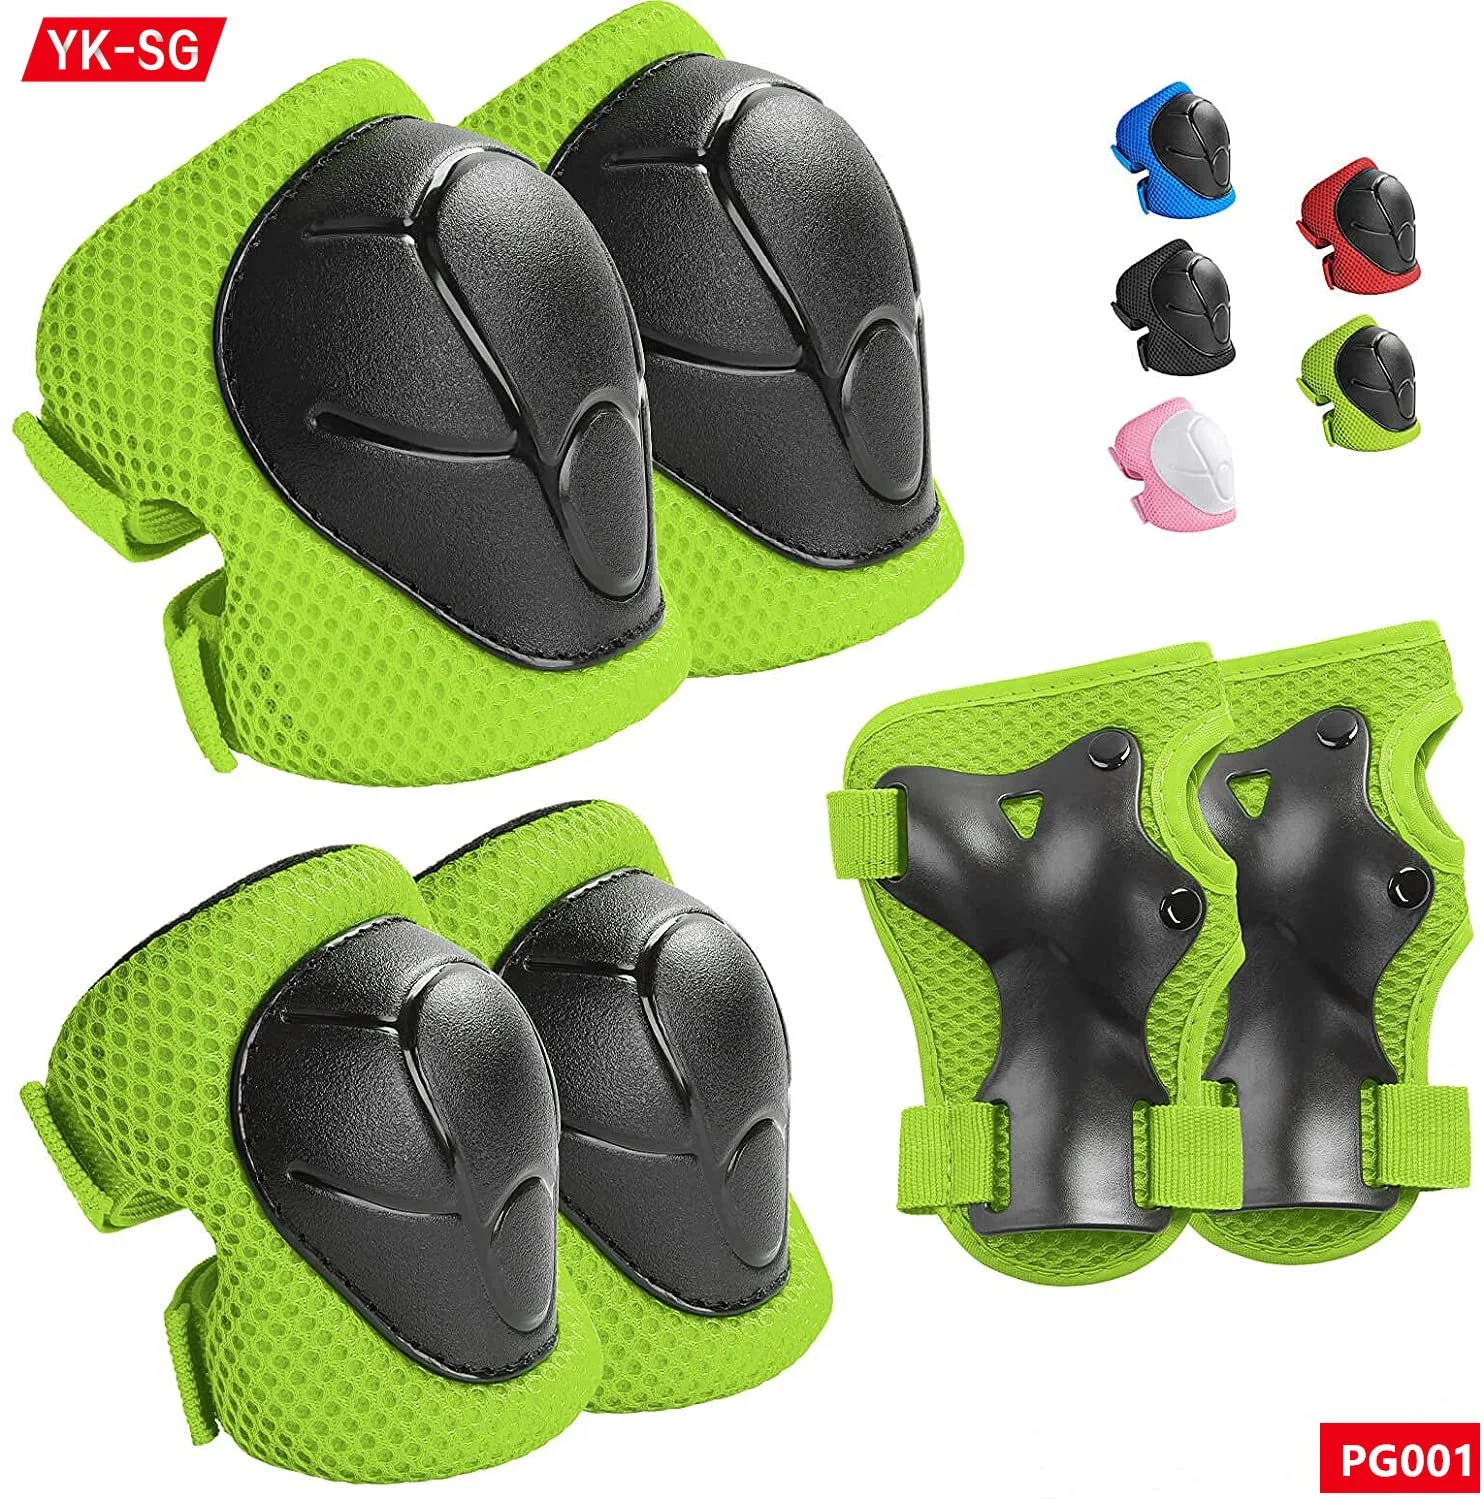 Hot Selling Safety Protective Gear/Pads for Kids Elbow and Knee Skating Sports Kid Protective Gears